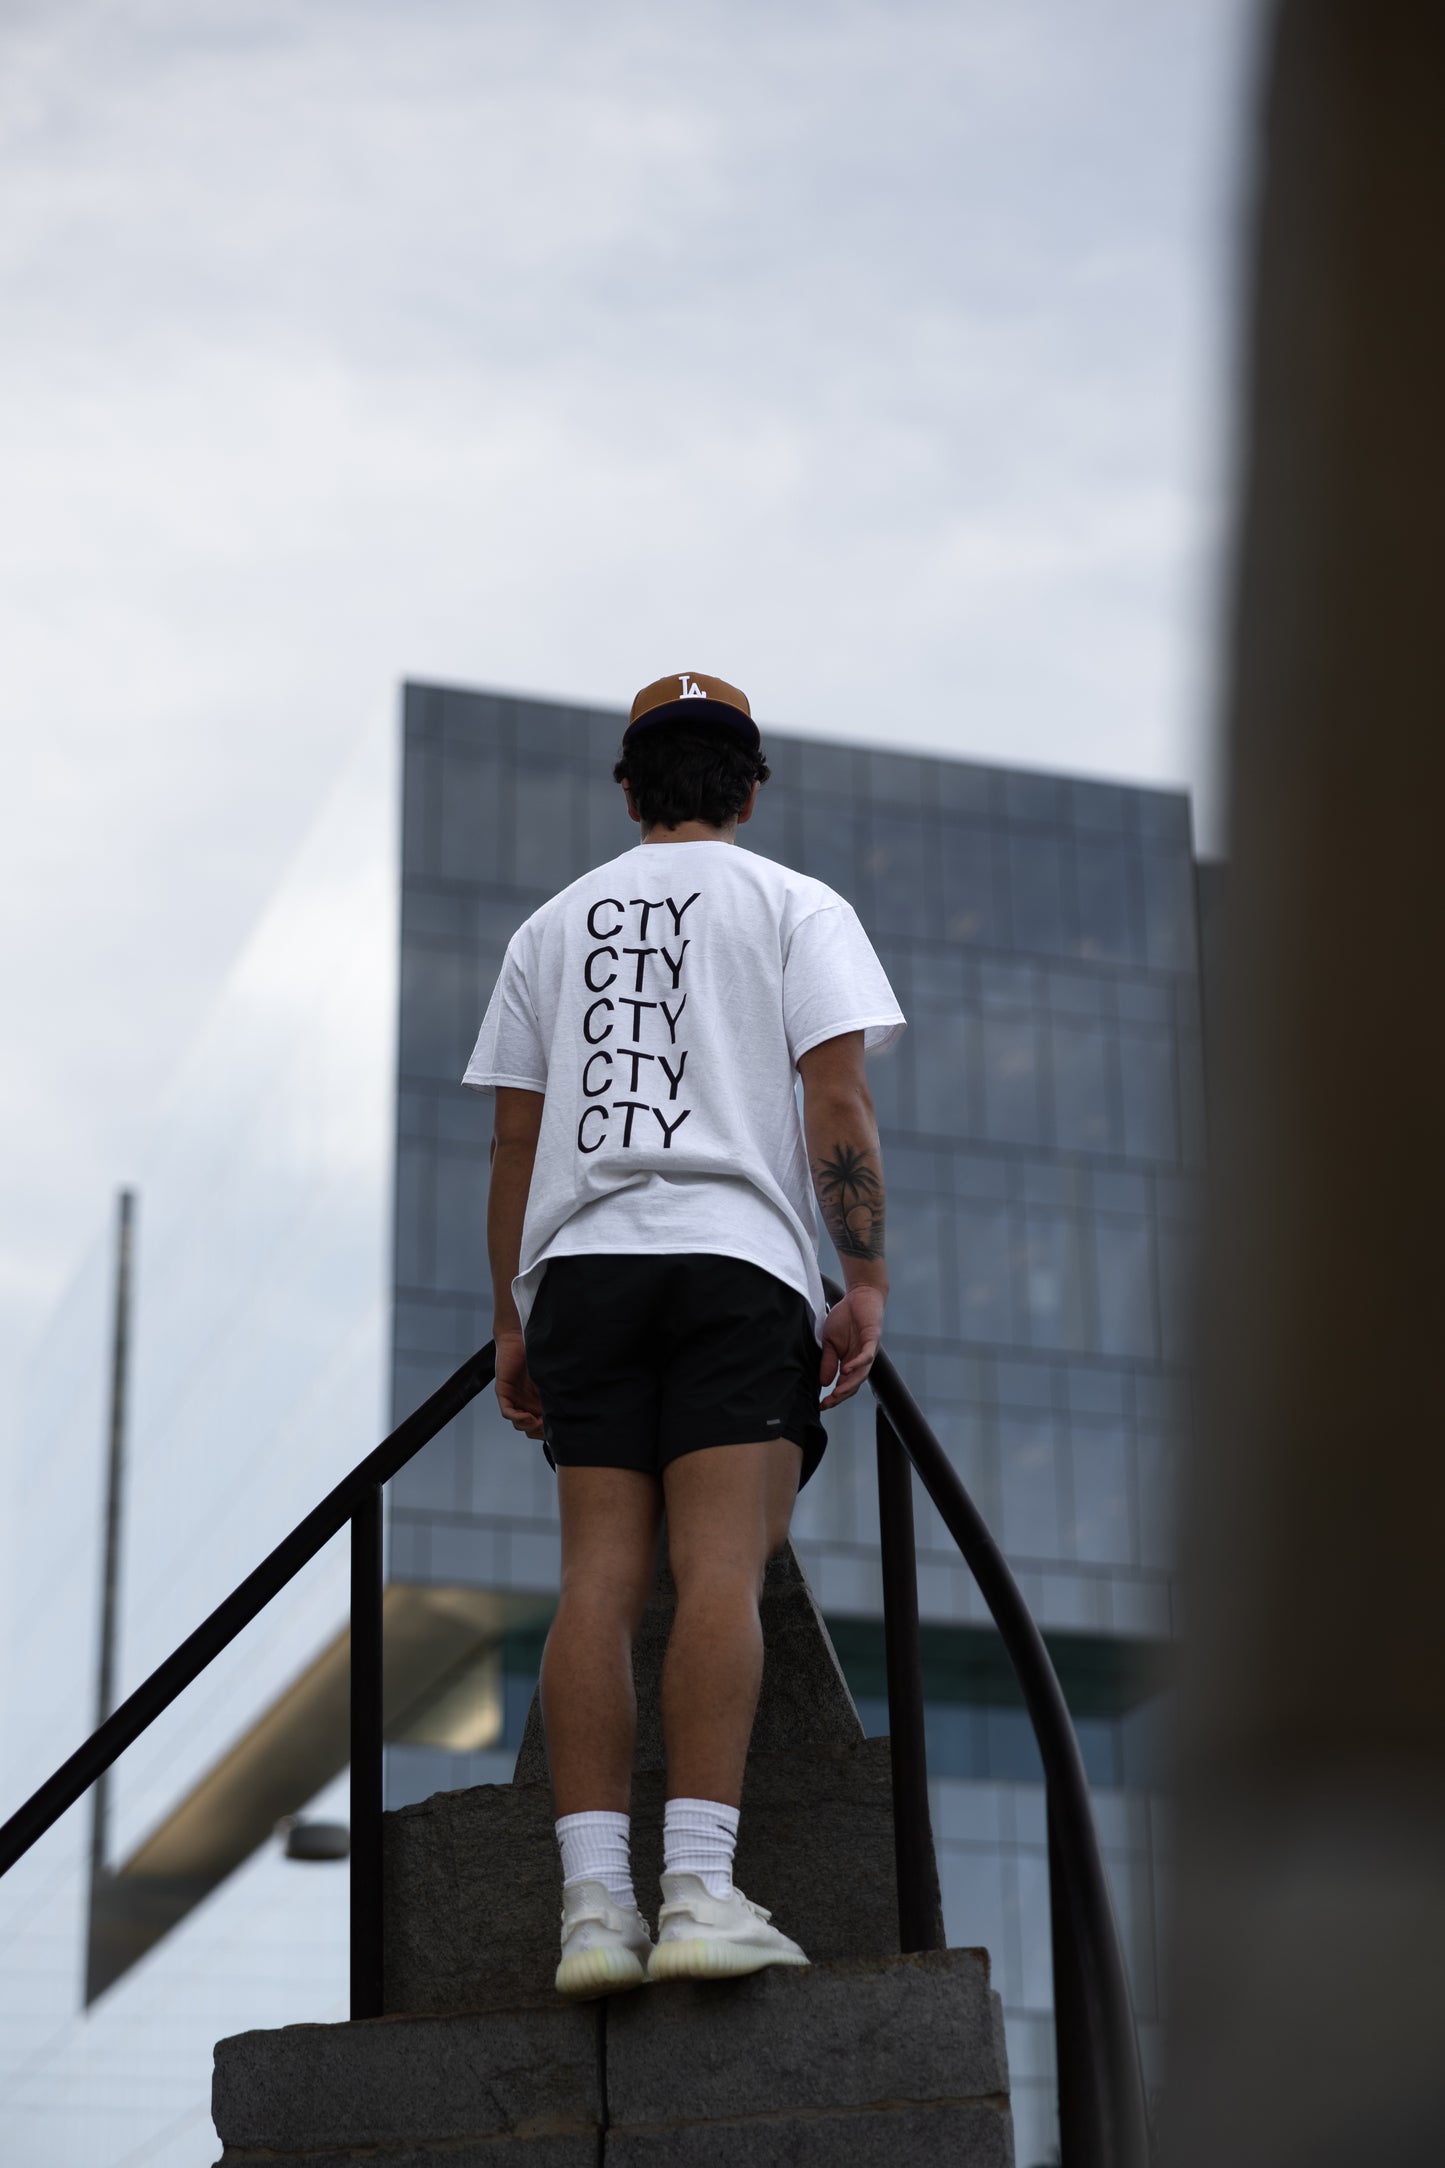 OFF-WHITE INSPIRED "CTY" Tee